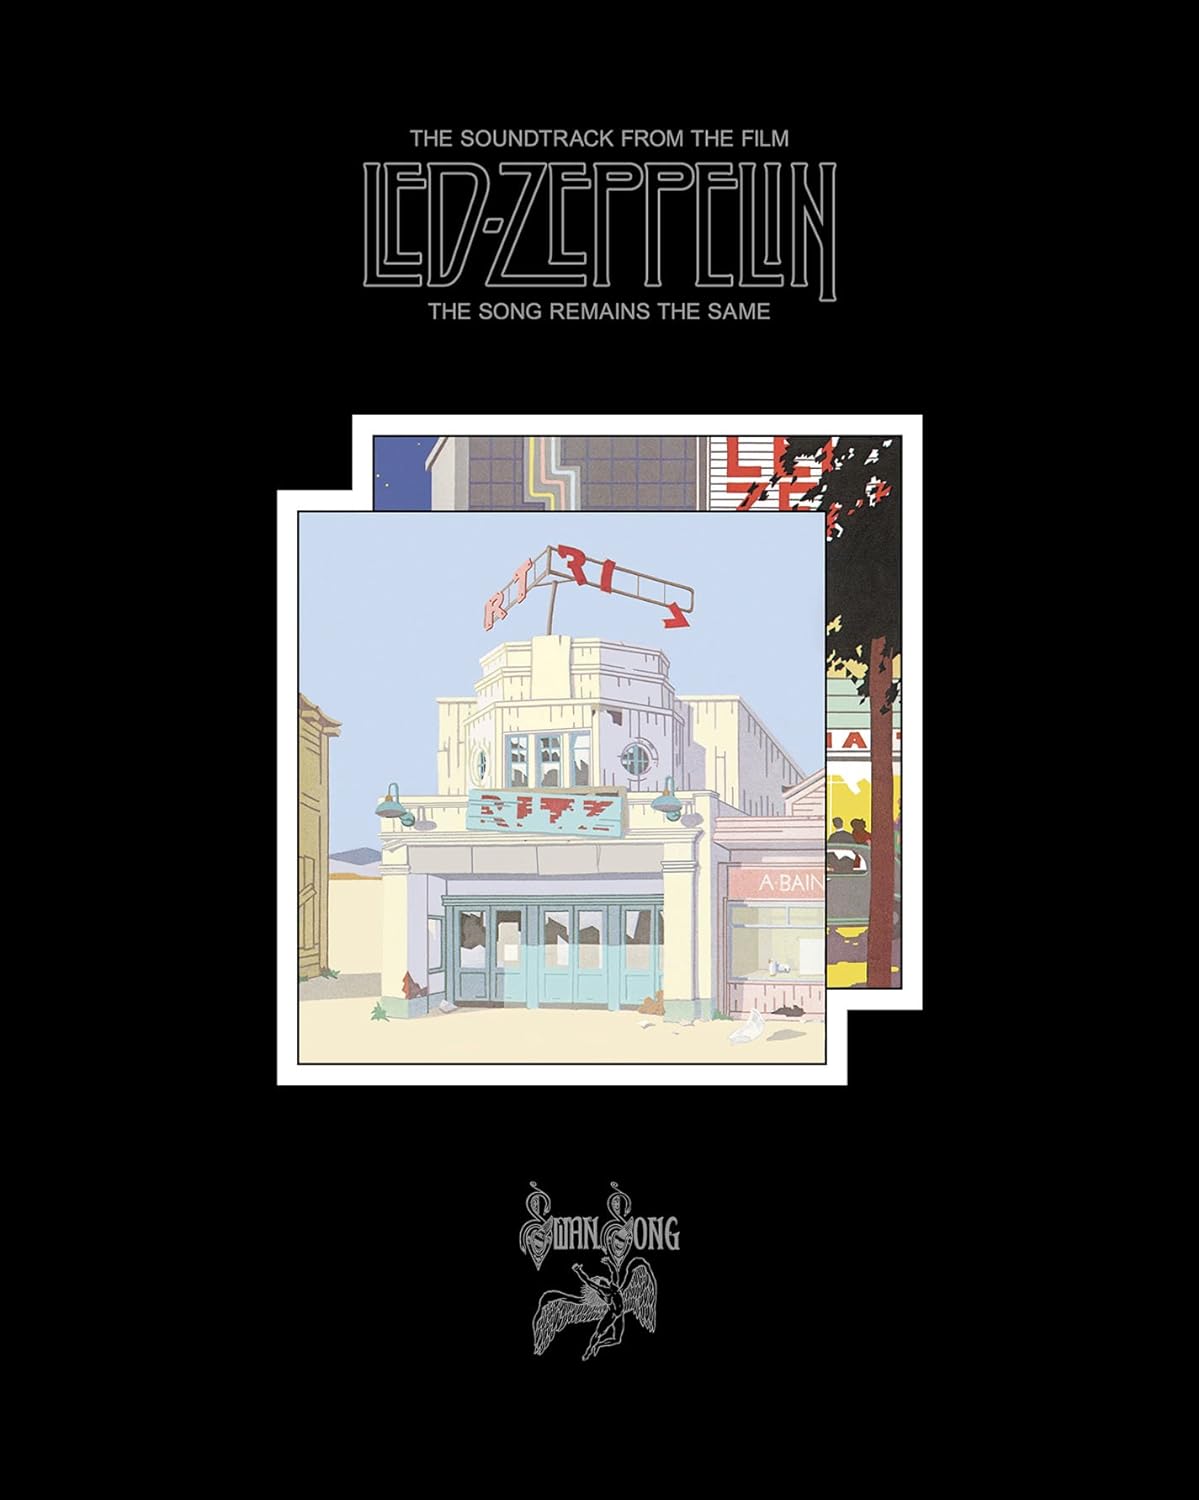 The Soundtrack From The Film The Song Remains The Same (Blu-Ry Disc) | Led Zeppelin